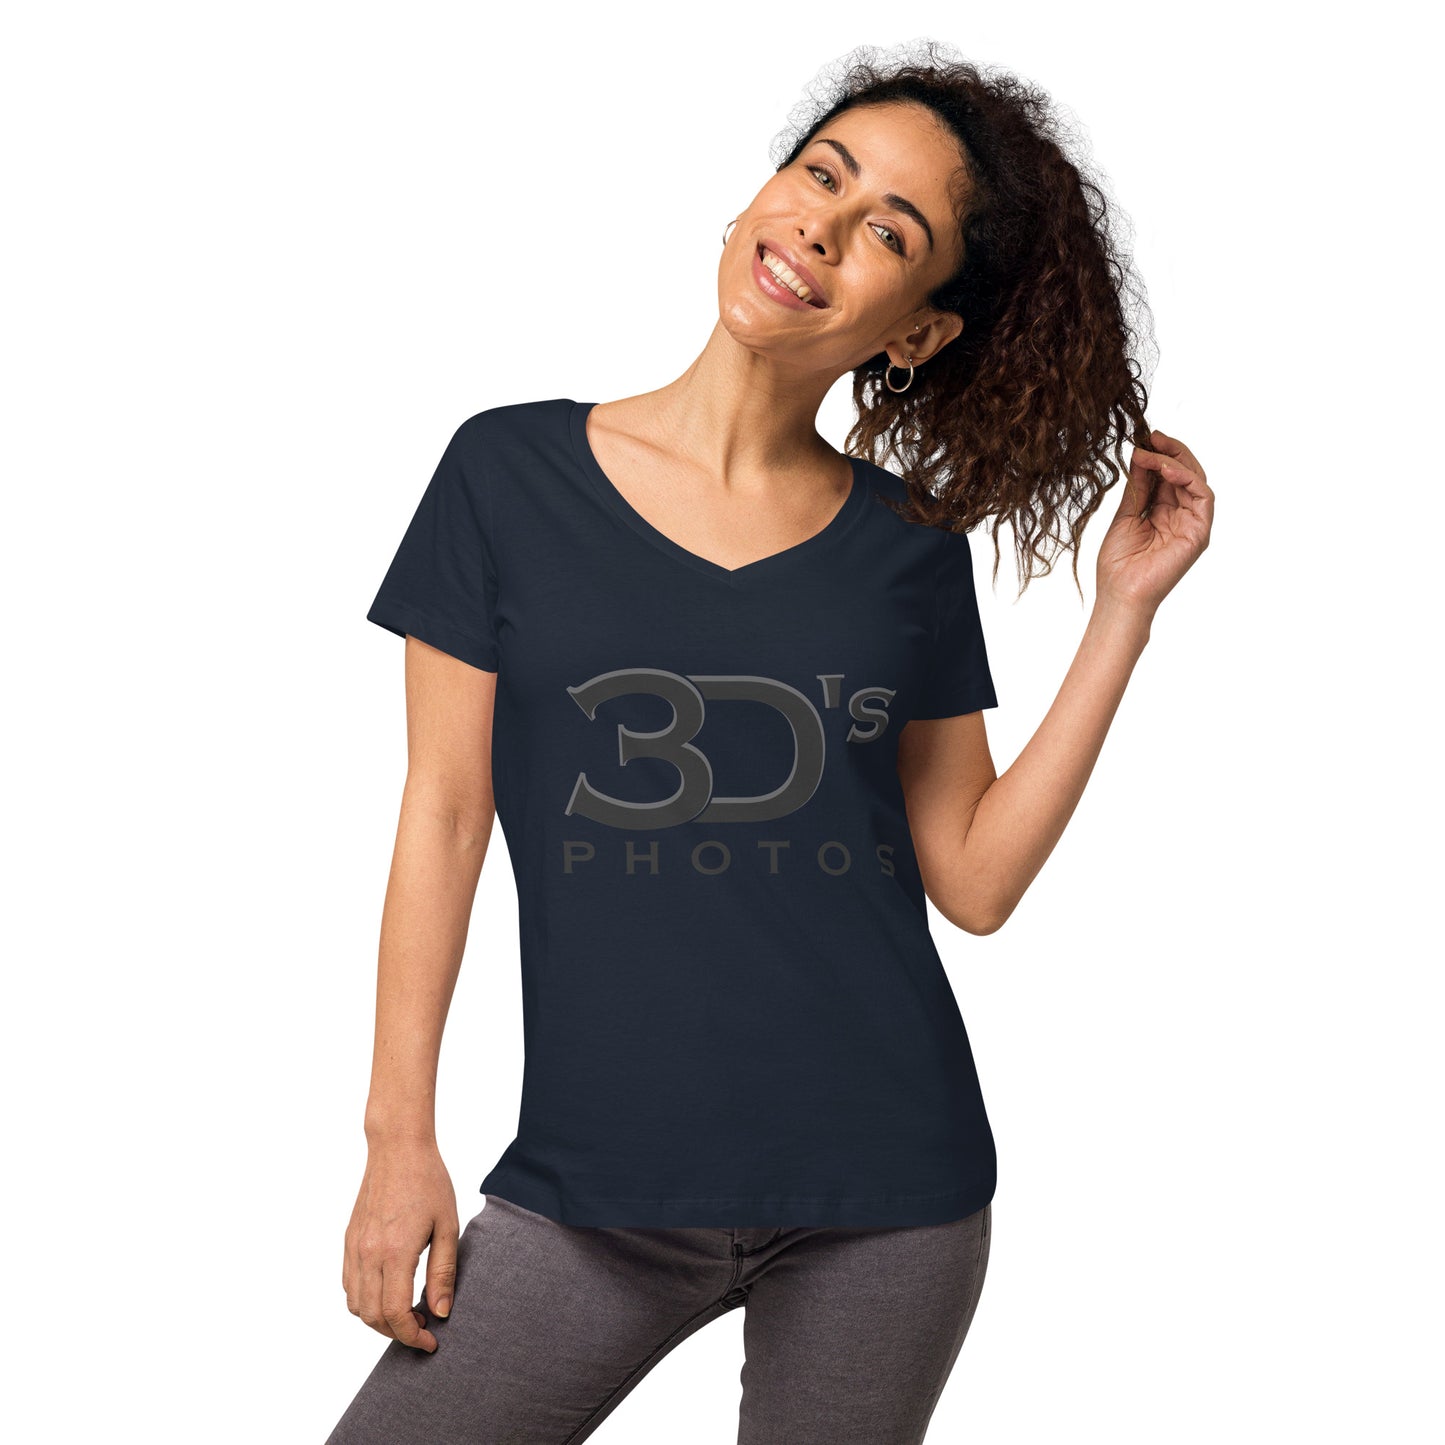 3D's Photos Women’s fitted v-neck t-shirt